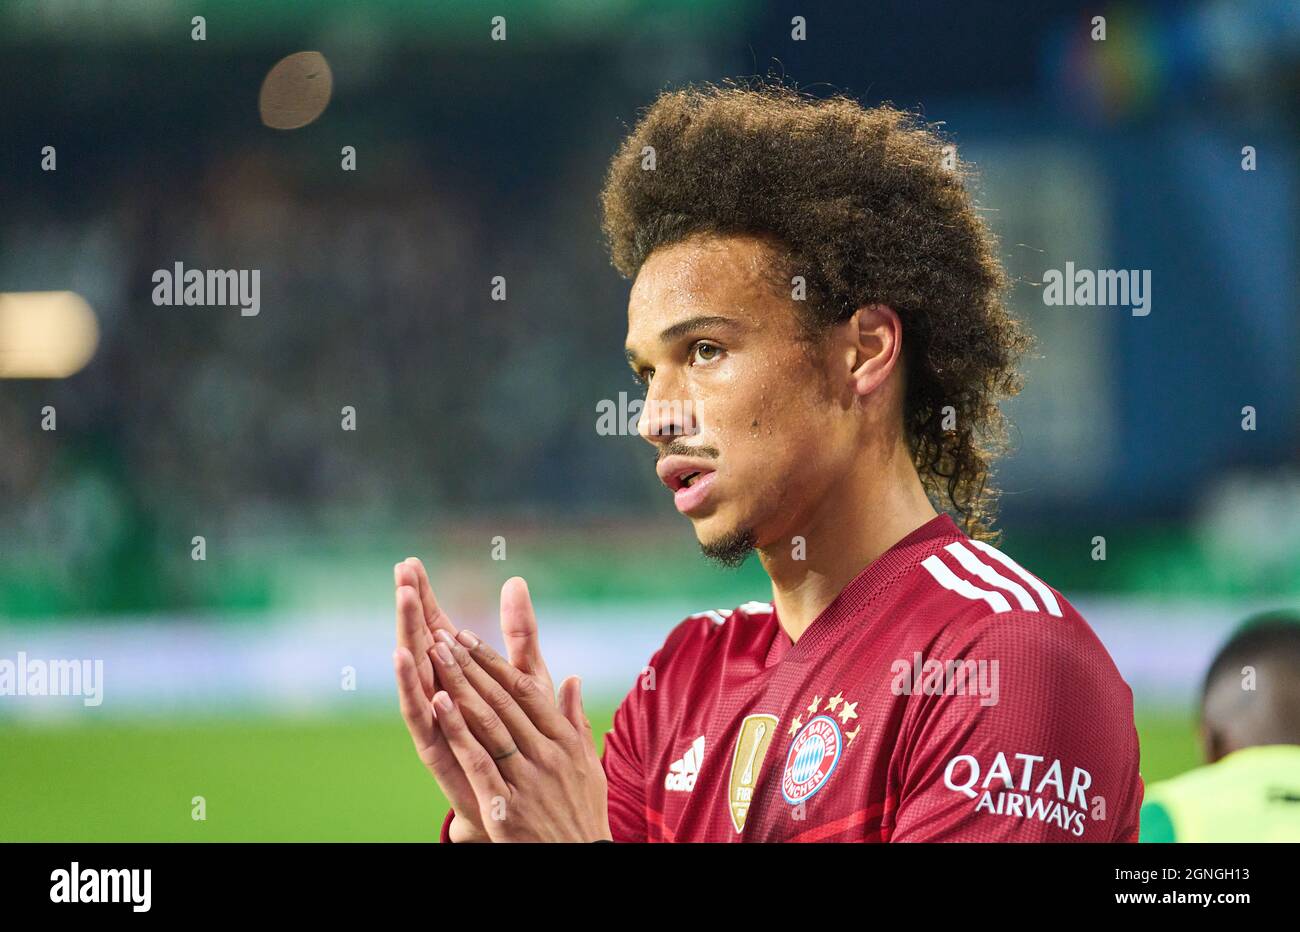 Leroy SANE, FCB 10  in the match SpVgg GREUTHER FÜRTH - FC BAYERN MUENCHEN 1-3 1.German Football League on September 24, 2021 in Fuerth, Germany. Season 2021/2022, matchday 7, 1.Bundesliga, FCB, München, 7.Spieltag. © Peter Schatz / Alamy Live News    - DFL REGULATIONS PROHIBIT ANY USE OF PHOTOGRAPHS as IMAGE SEQUENCES and/or QUASI-VIDEO - Stock Photo